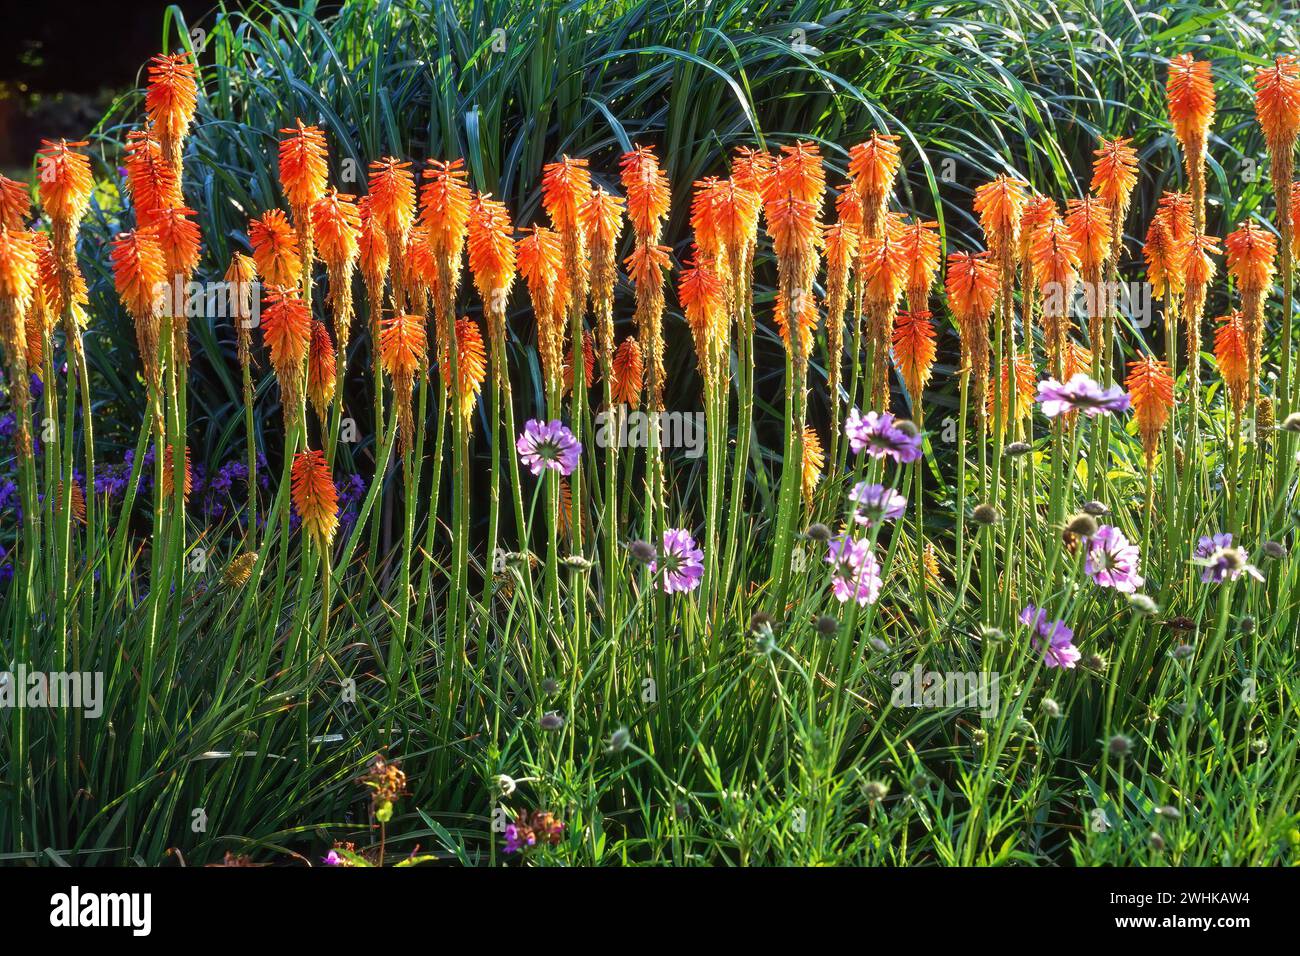 Kniphofia Fiery Fred, Red Hot Poker flowers with Scabious Penhill Blue flowers in garden border, England, UK Stock Photo